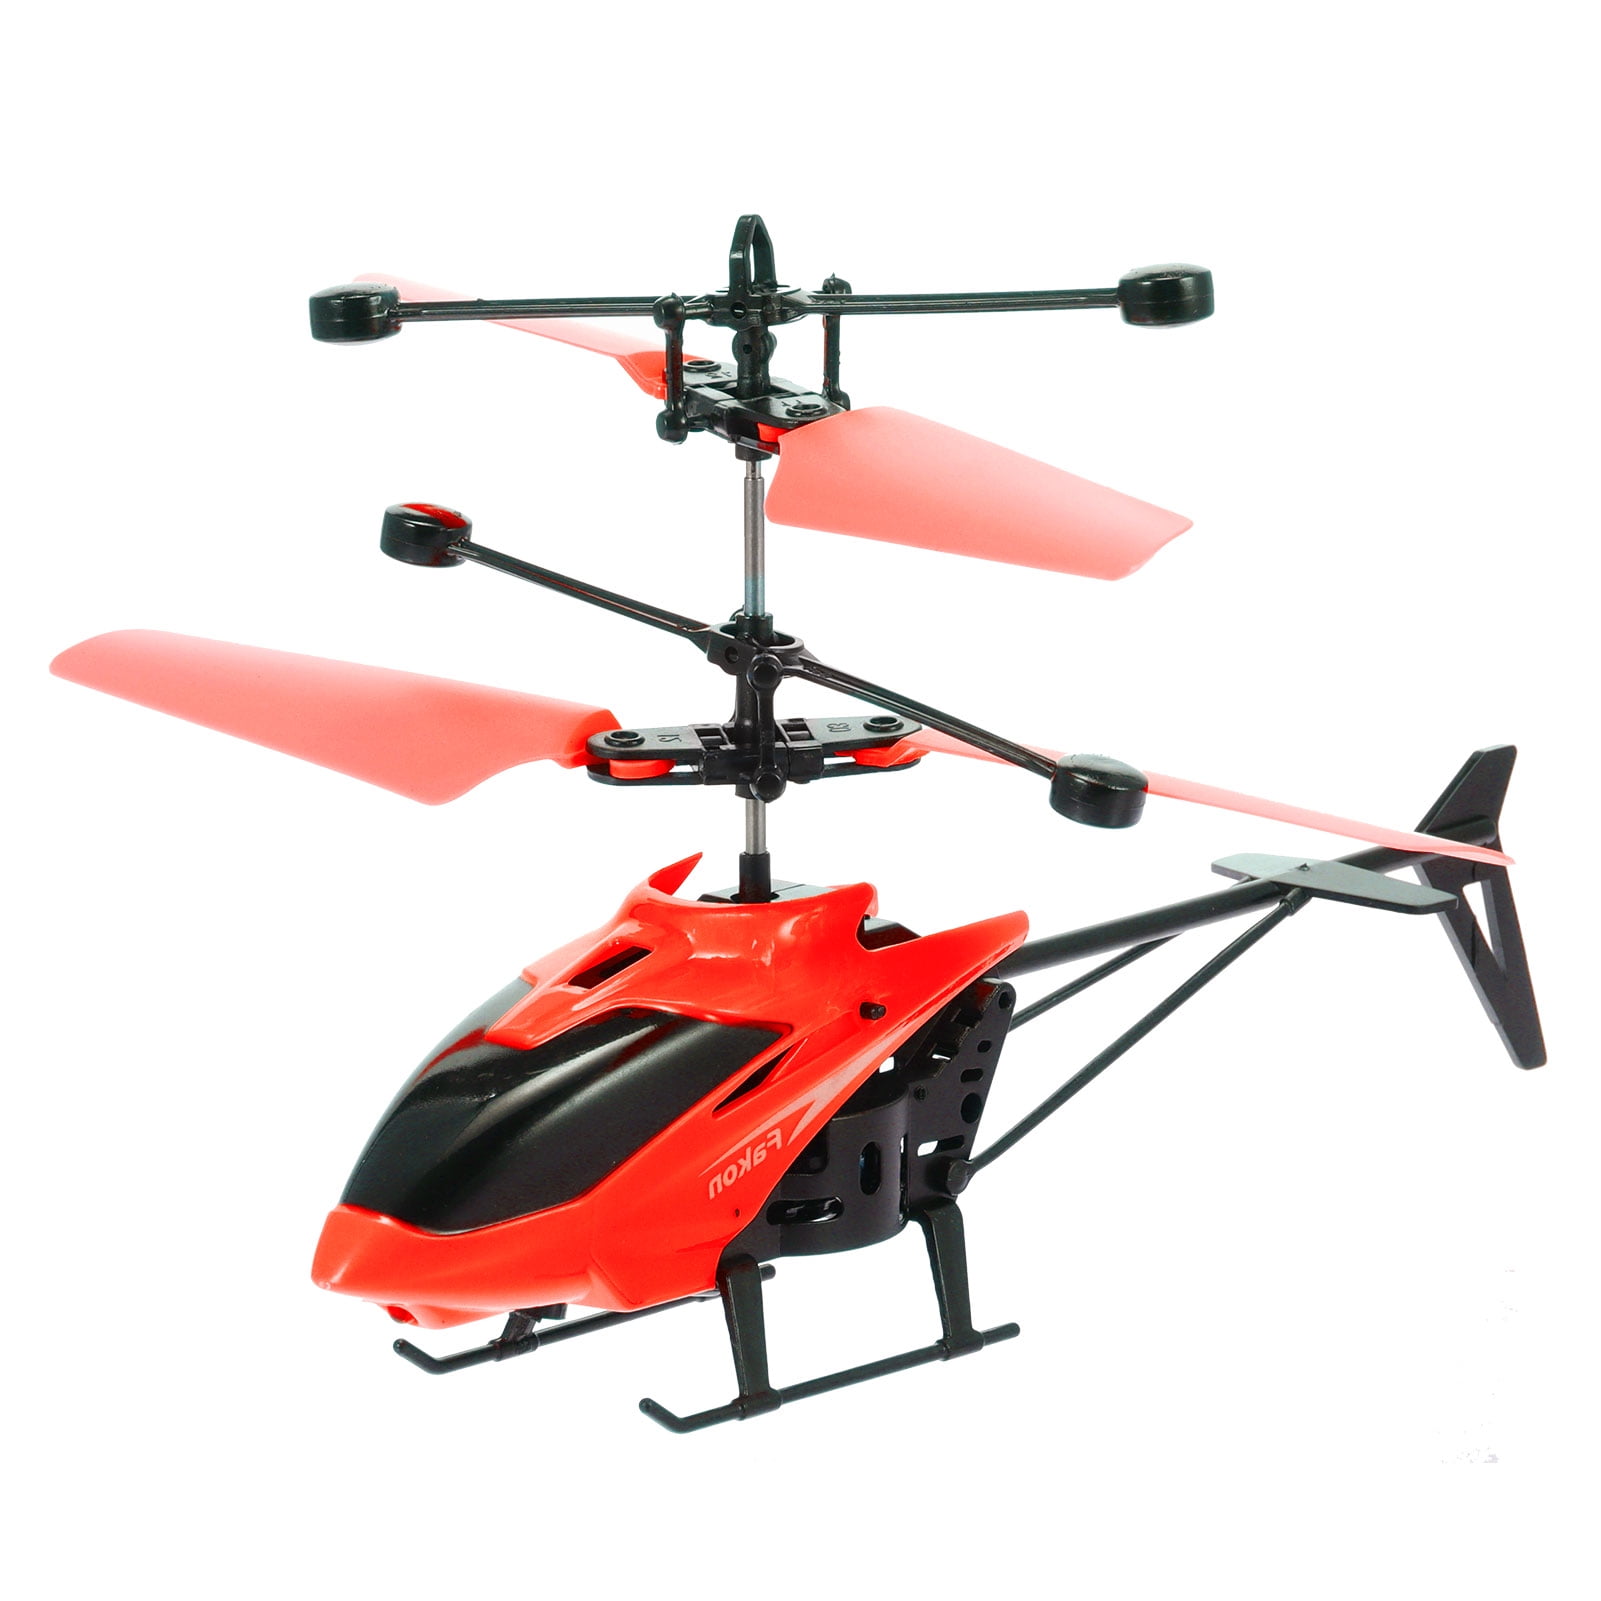 Details about   Flying Dinosaur Helicopter Sensor Flying Remote Control Aircraft  Toys New!!! 